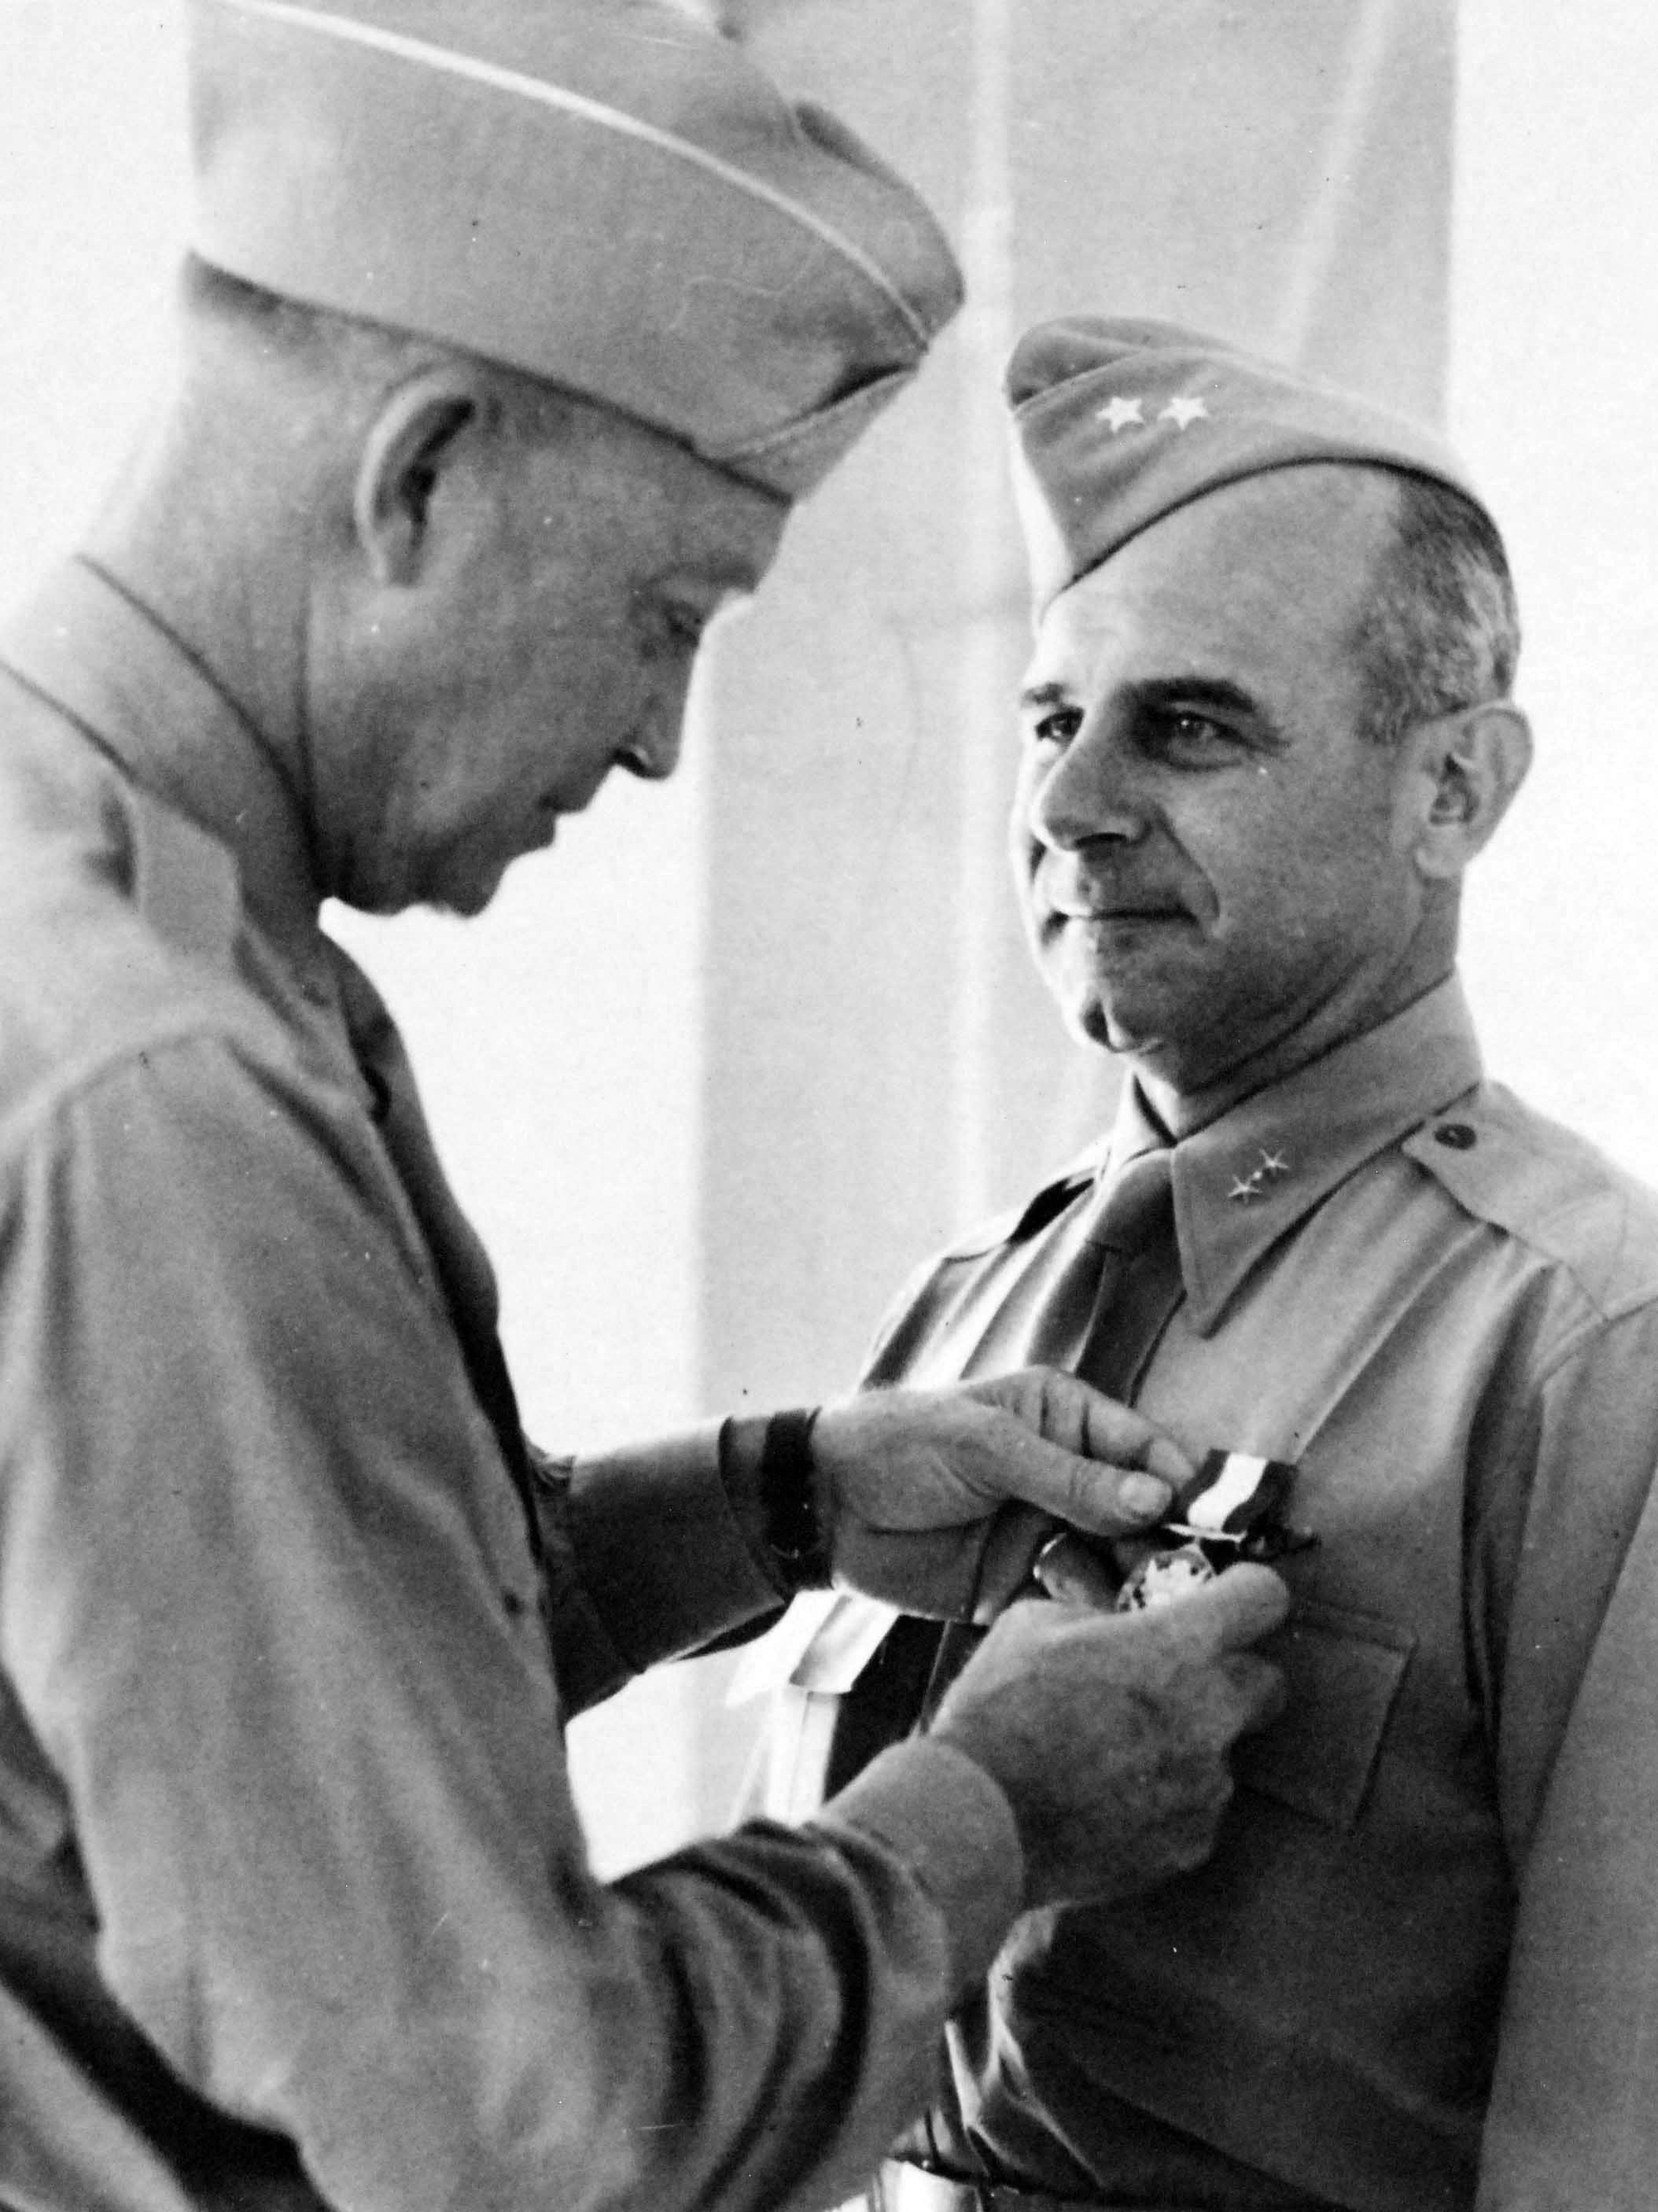 General Dwight Eisenhower presenting the Distinguished Service Medal to Major General James Doolittle at a ceremony in North Africa, probably Tunisia, late 1943.